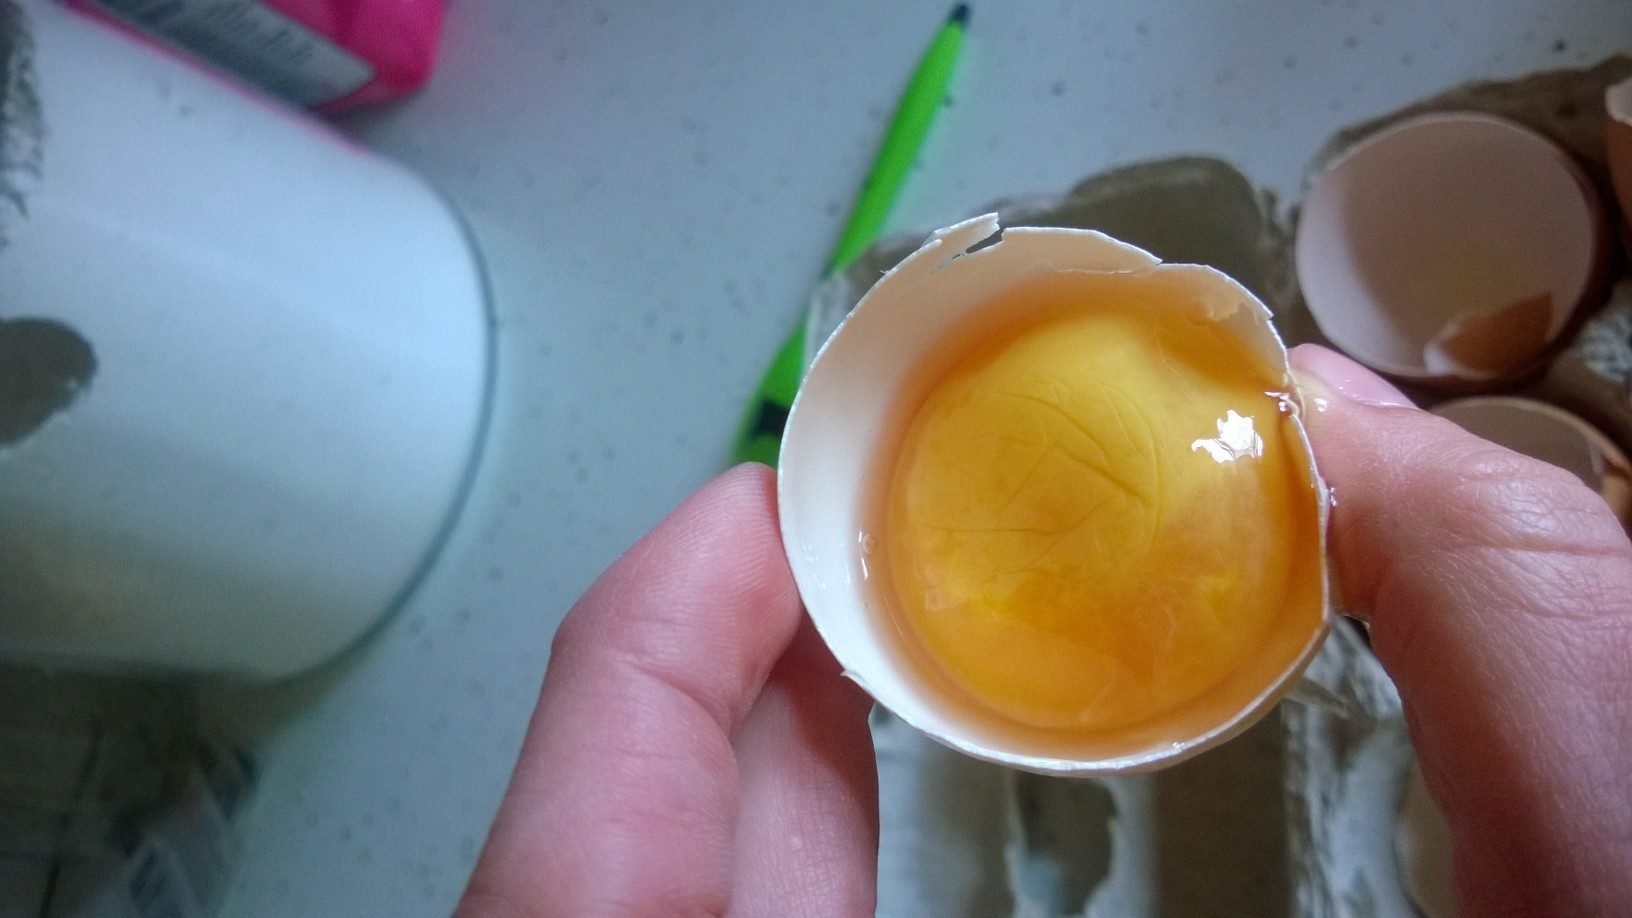 Rotten egg? What's up with this huge, weird-looking yolk?